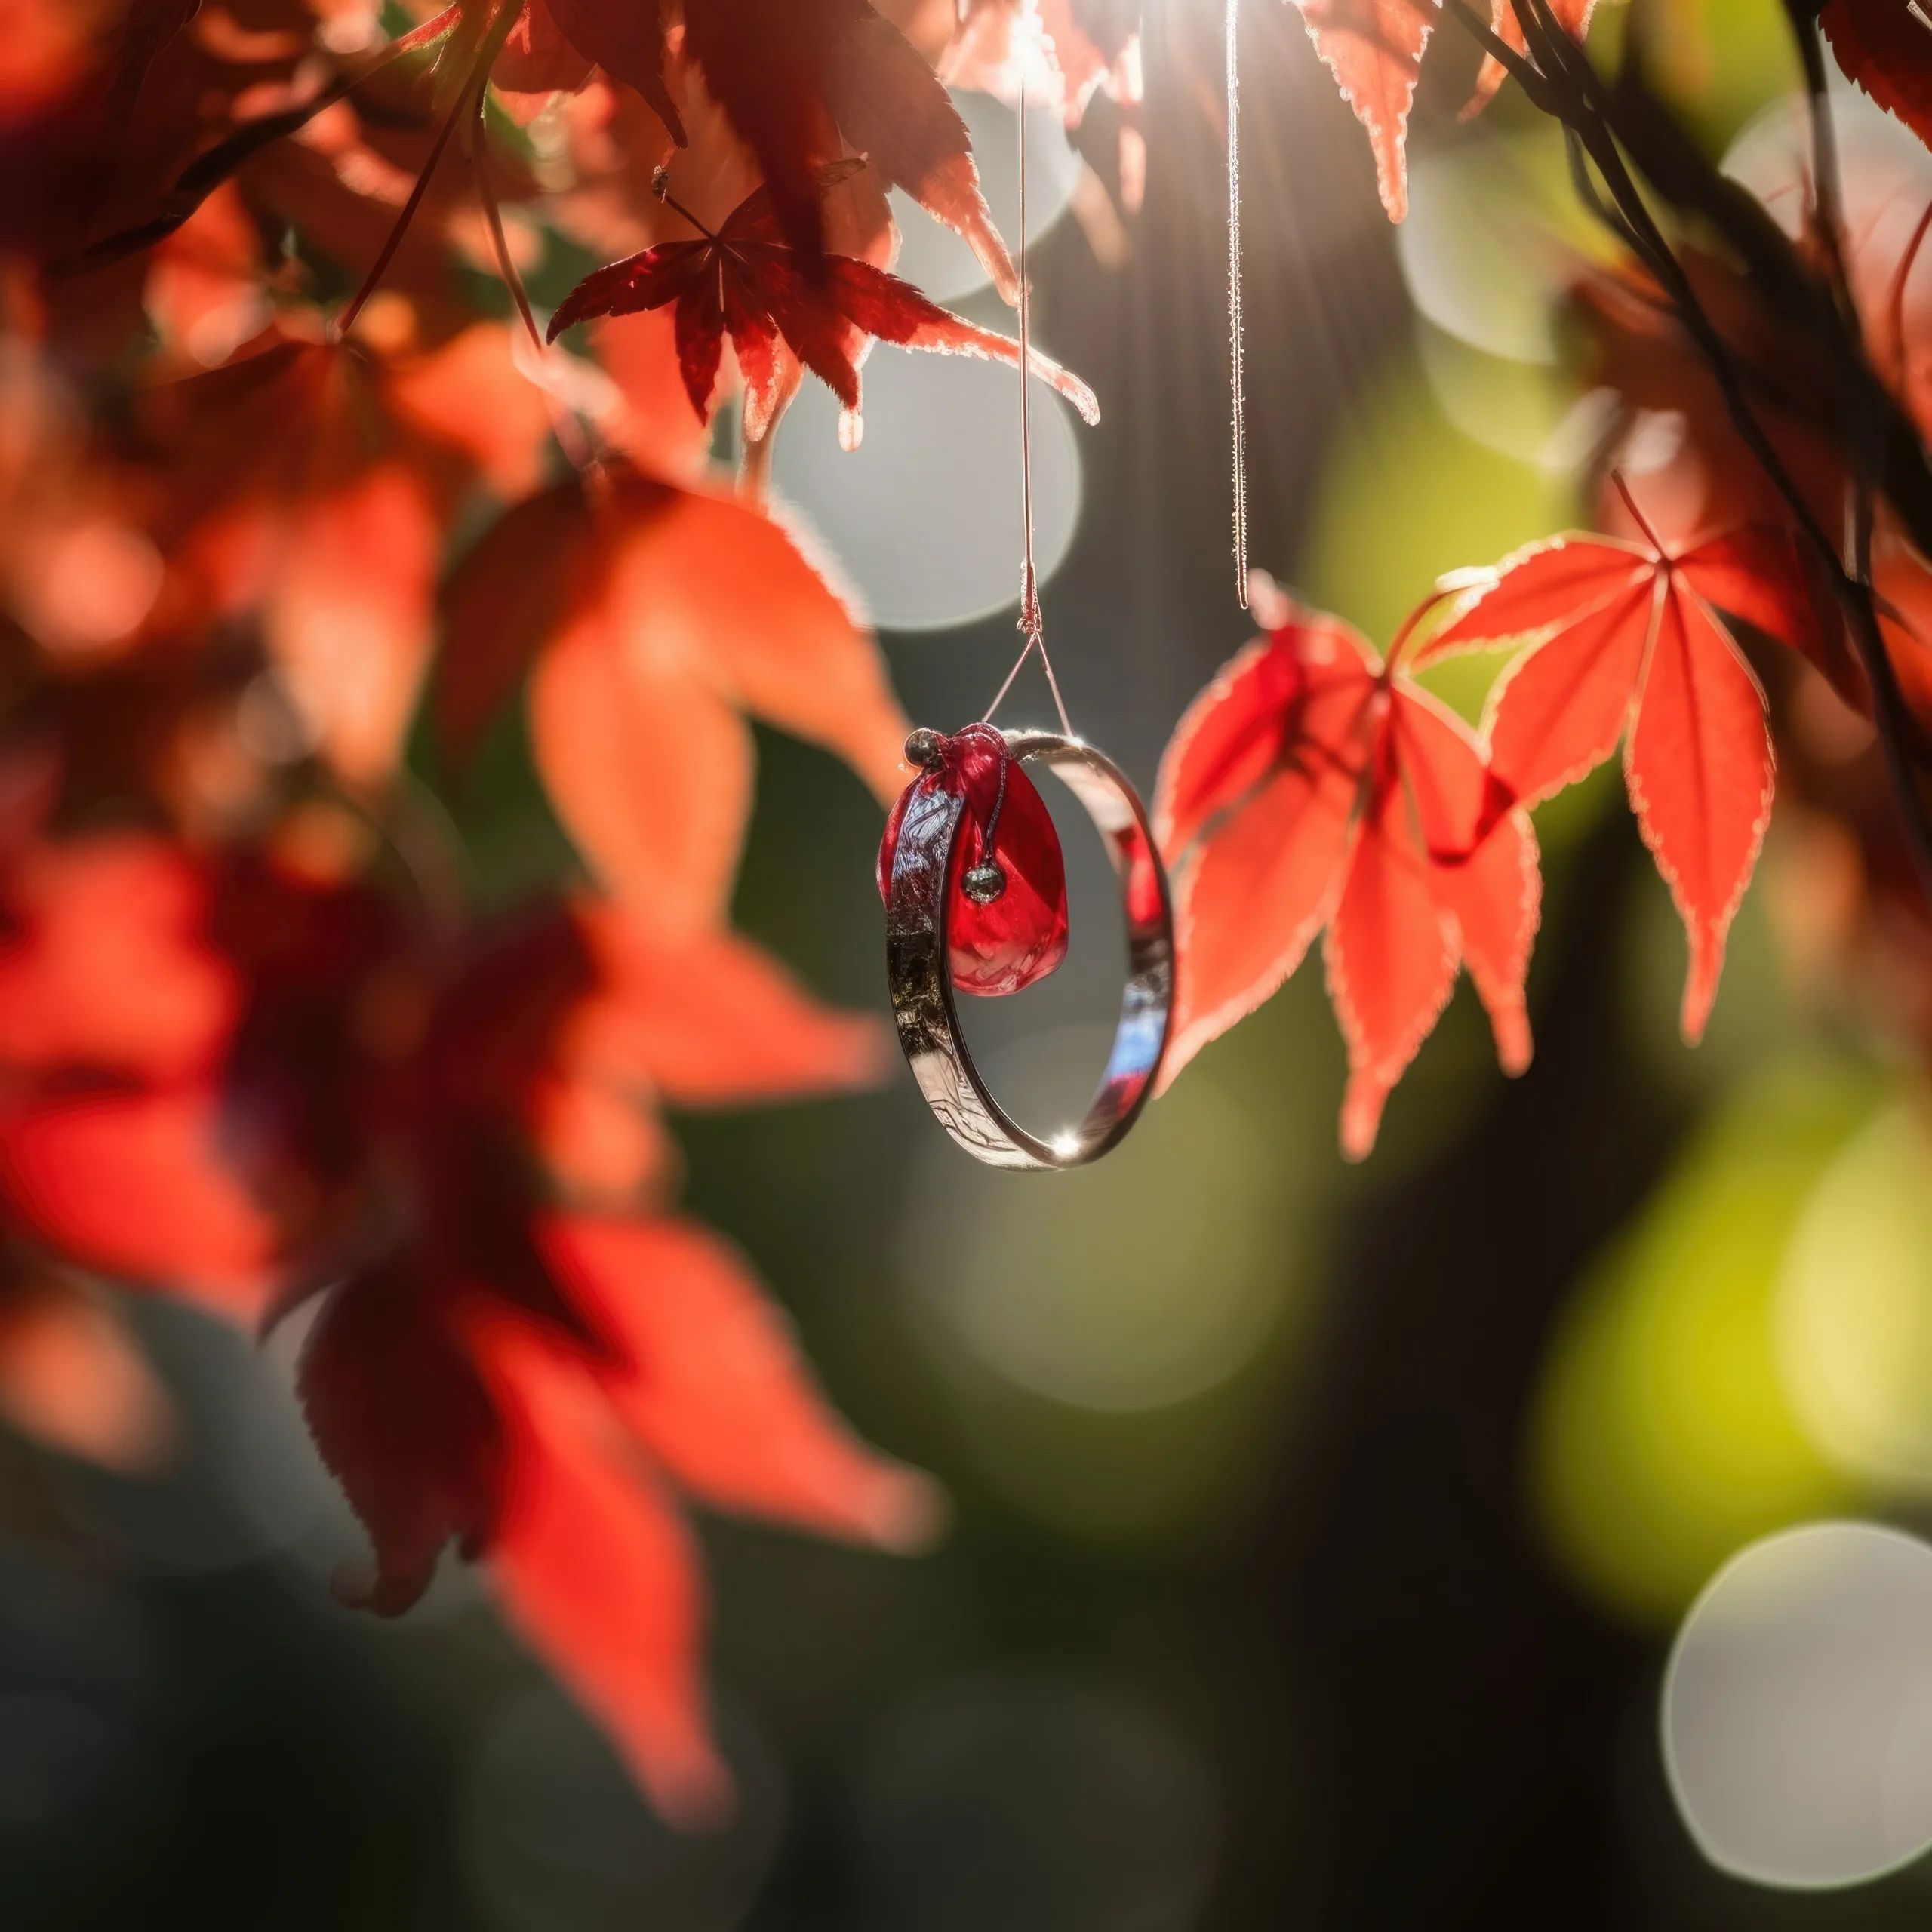 Farleigh House Weddings:A wedding ring hanging from a tree with red leaves.